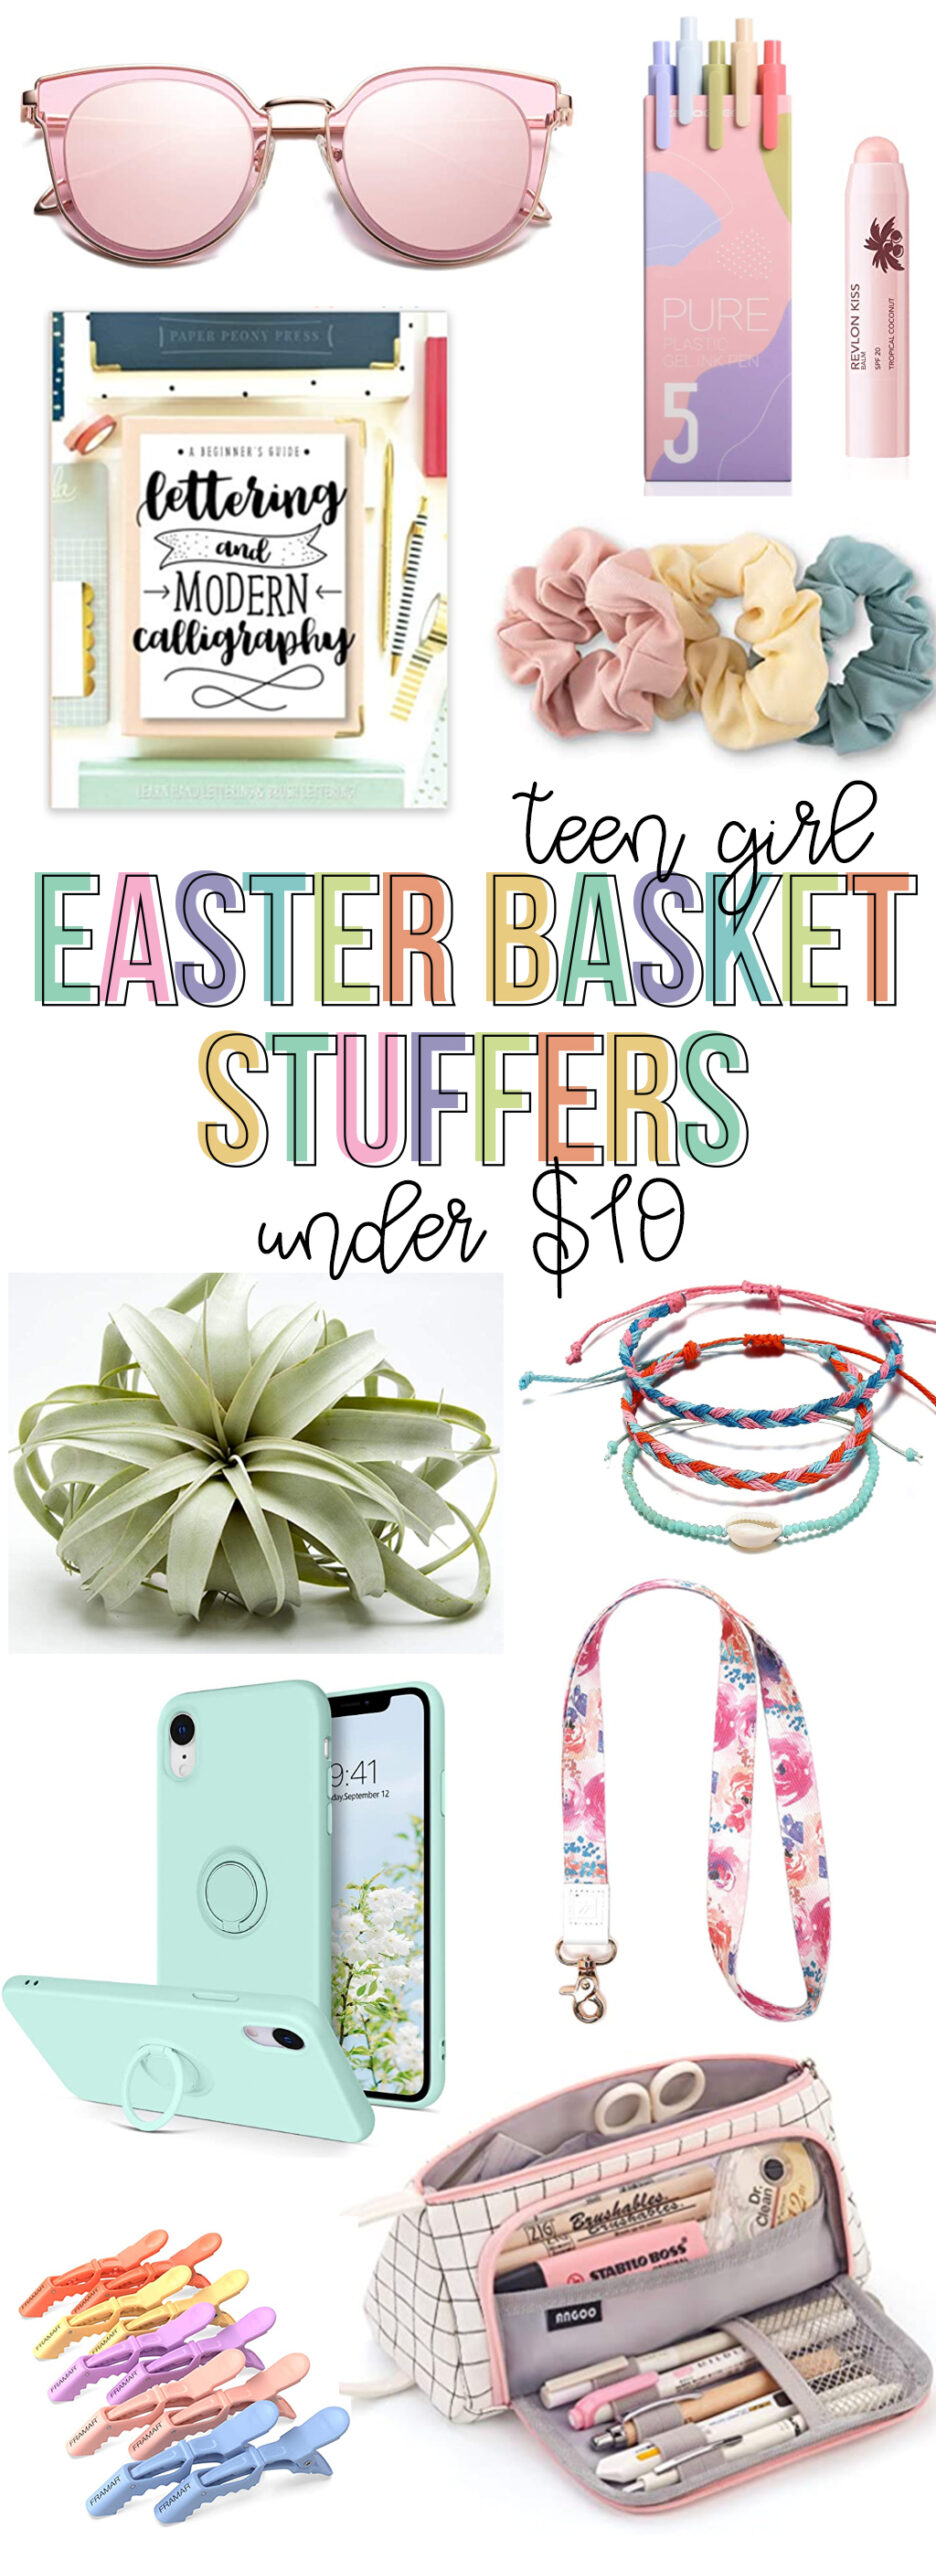 10 Gifts for Girls for Under $15 – Fun-Squared